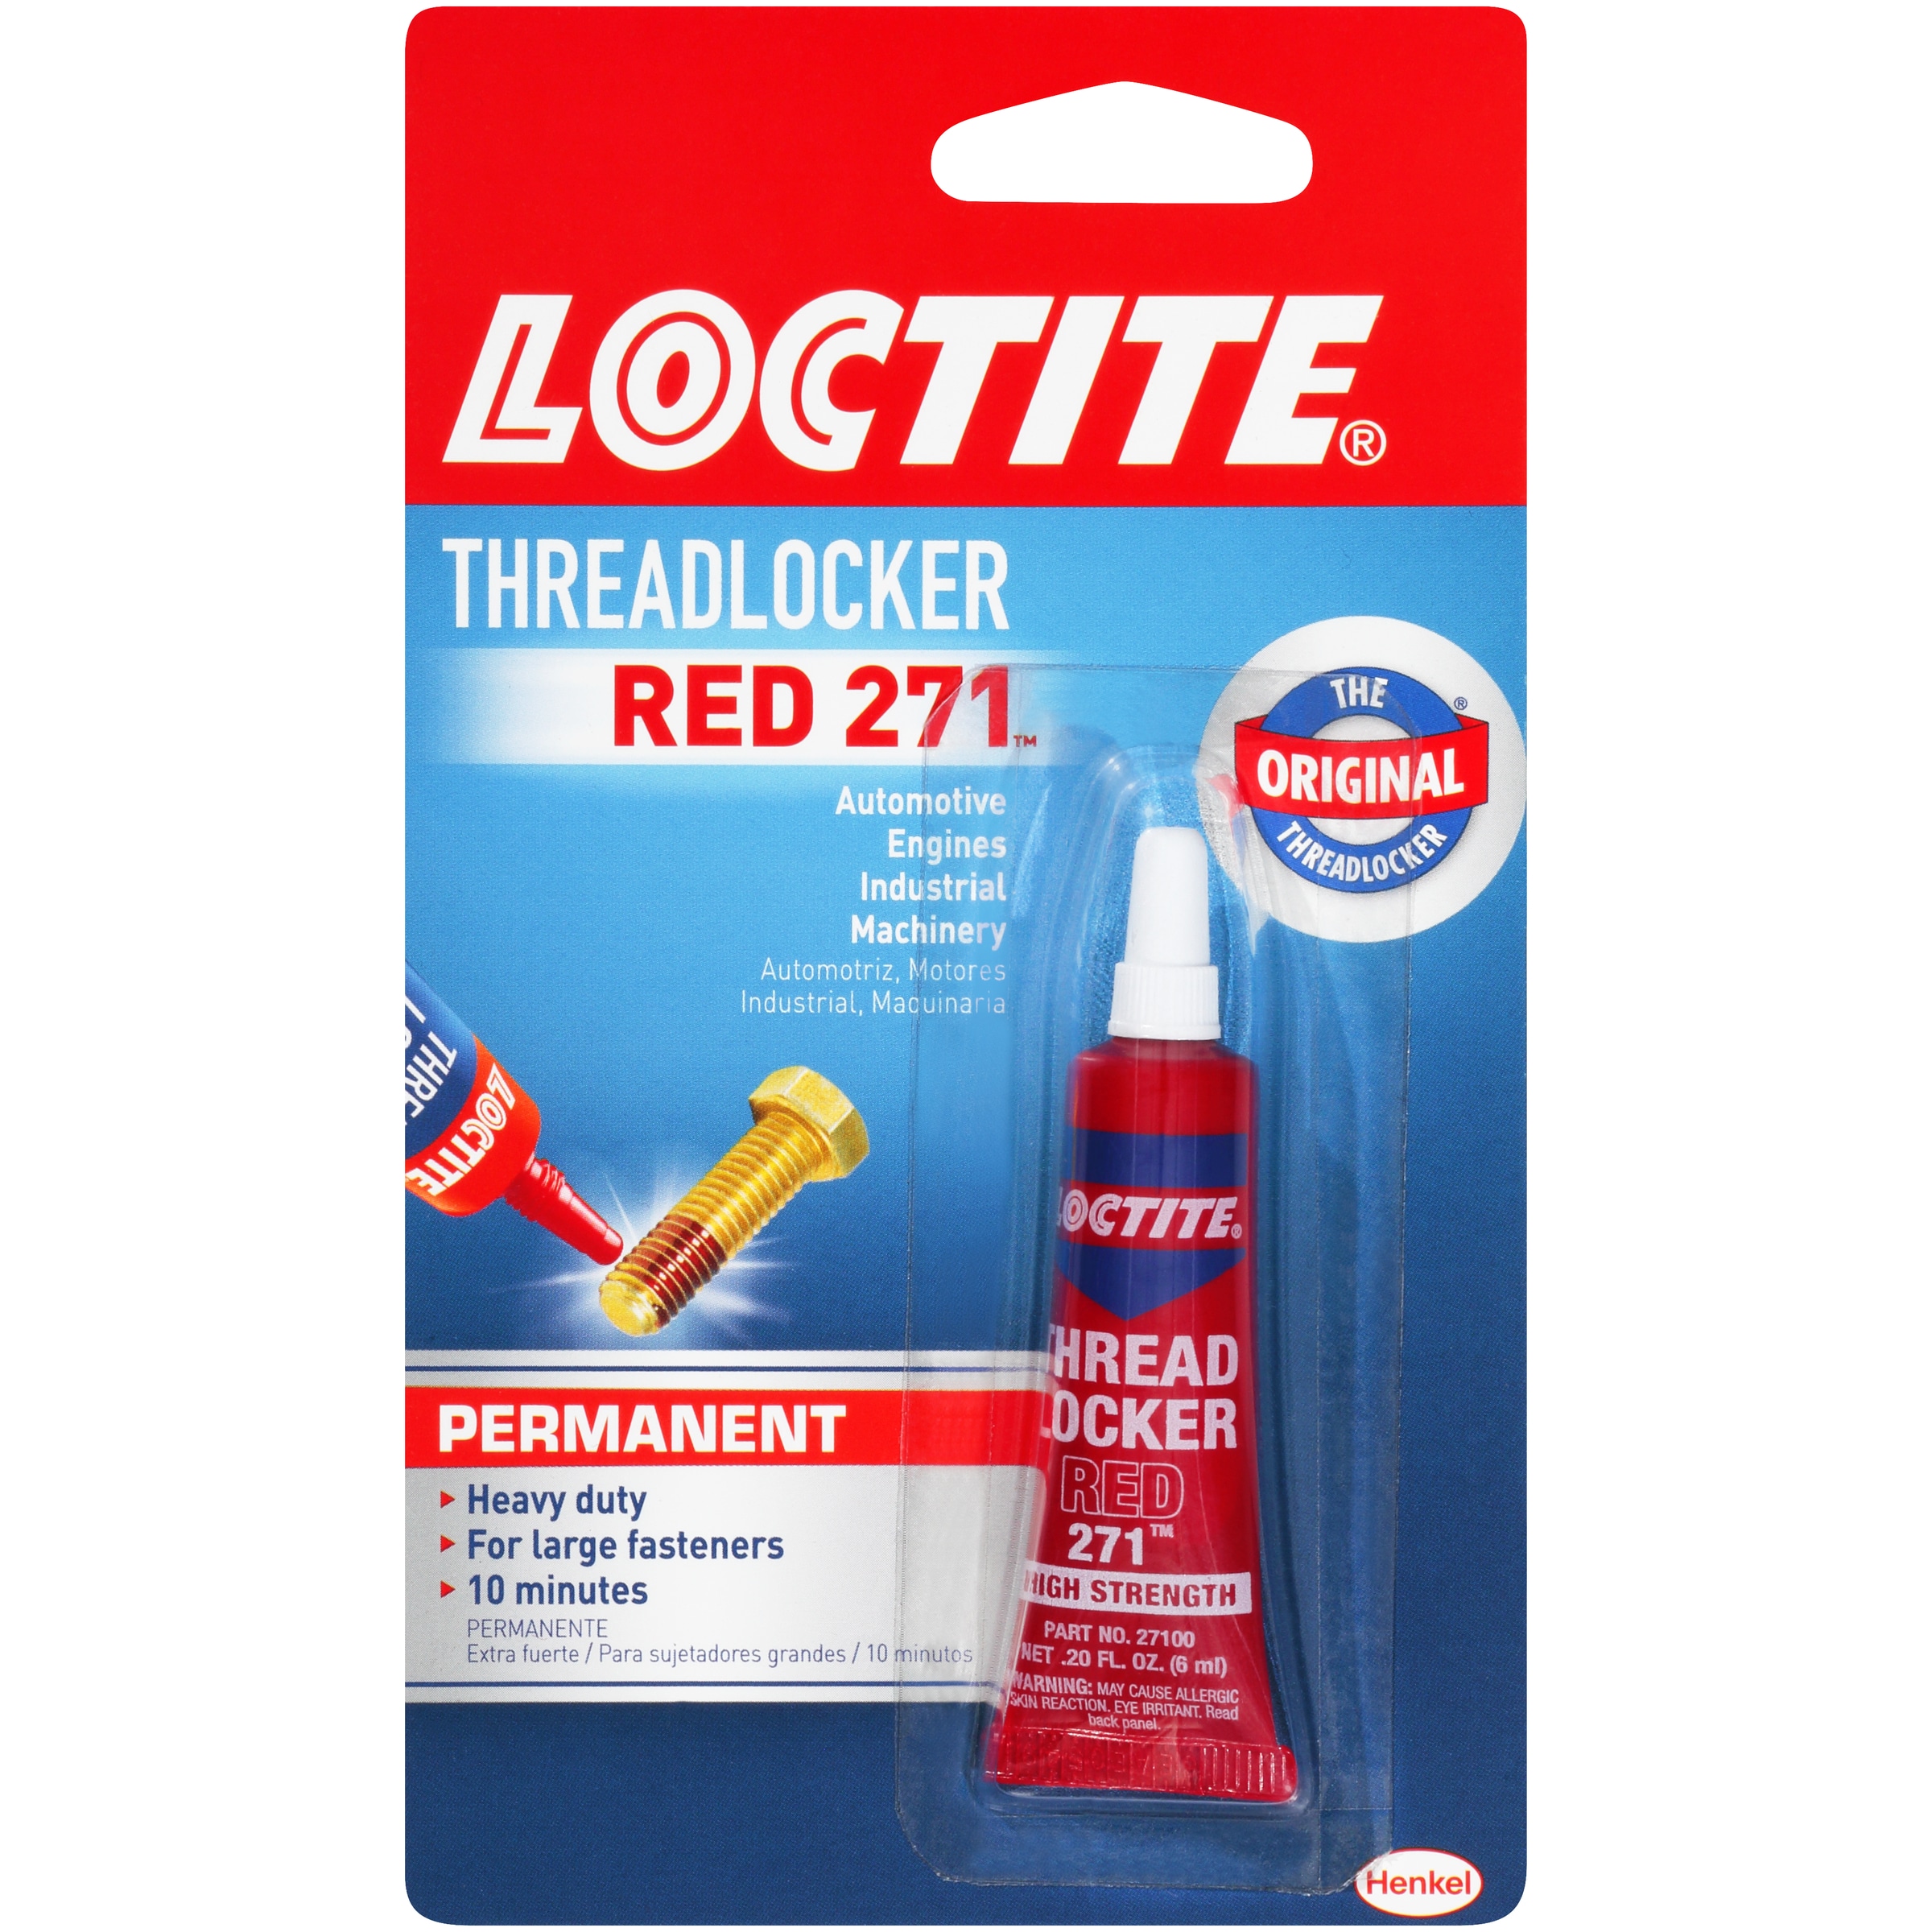 LOCTITE Threadlocker Red 271 0.2-fl oz Automotive and Equipment Specialty  Adhesive